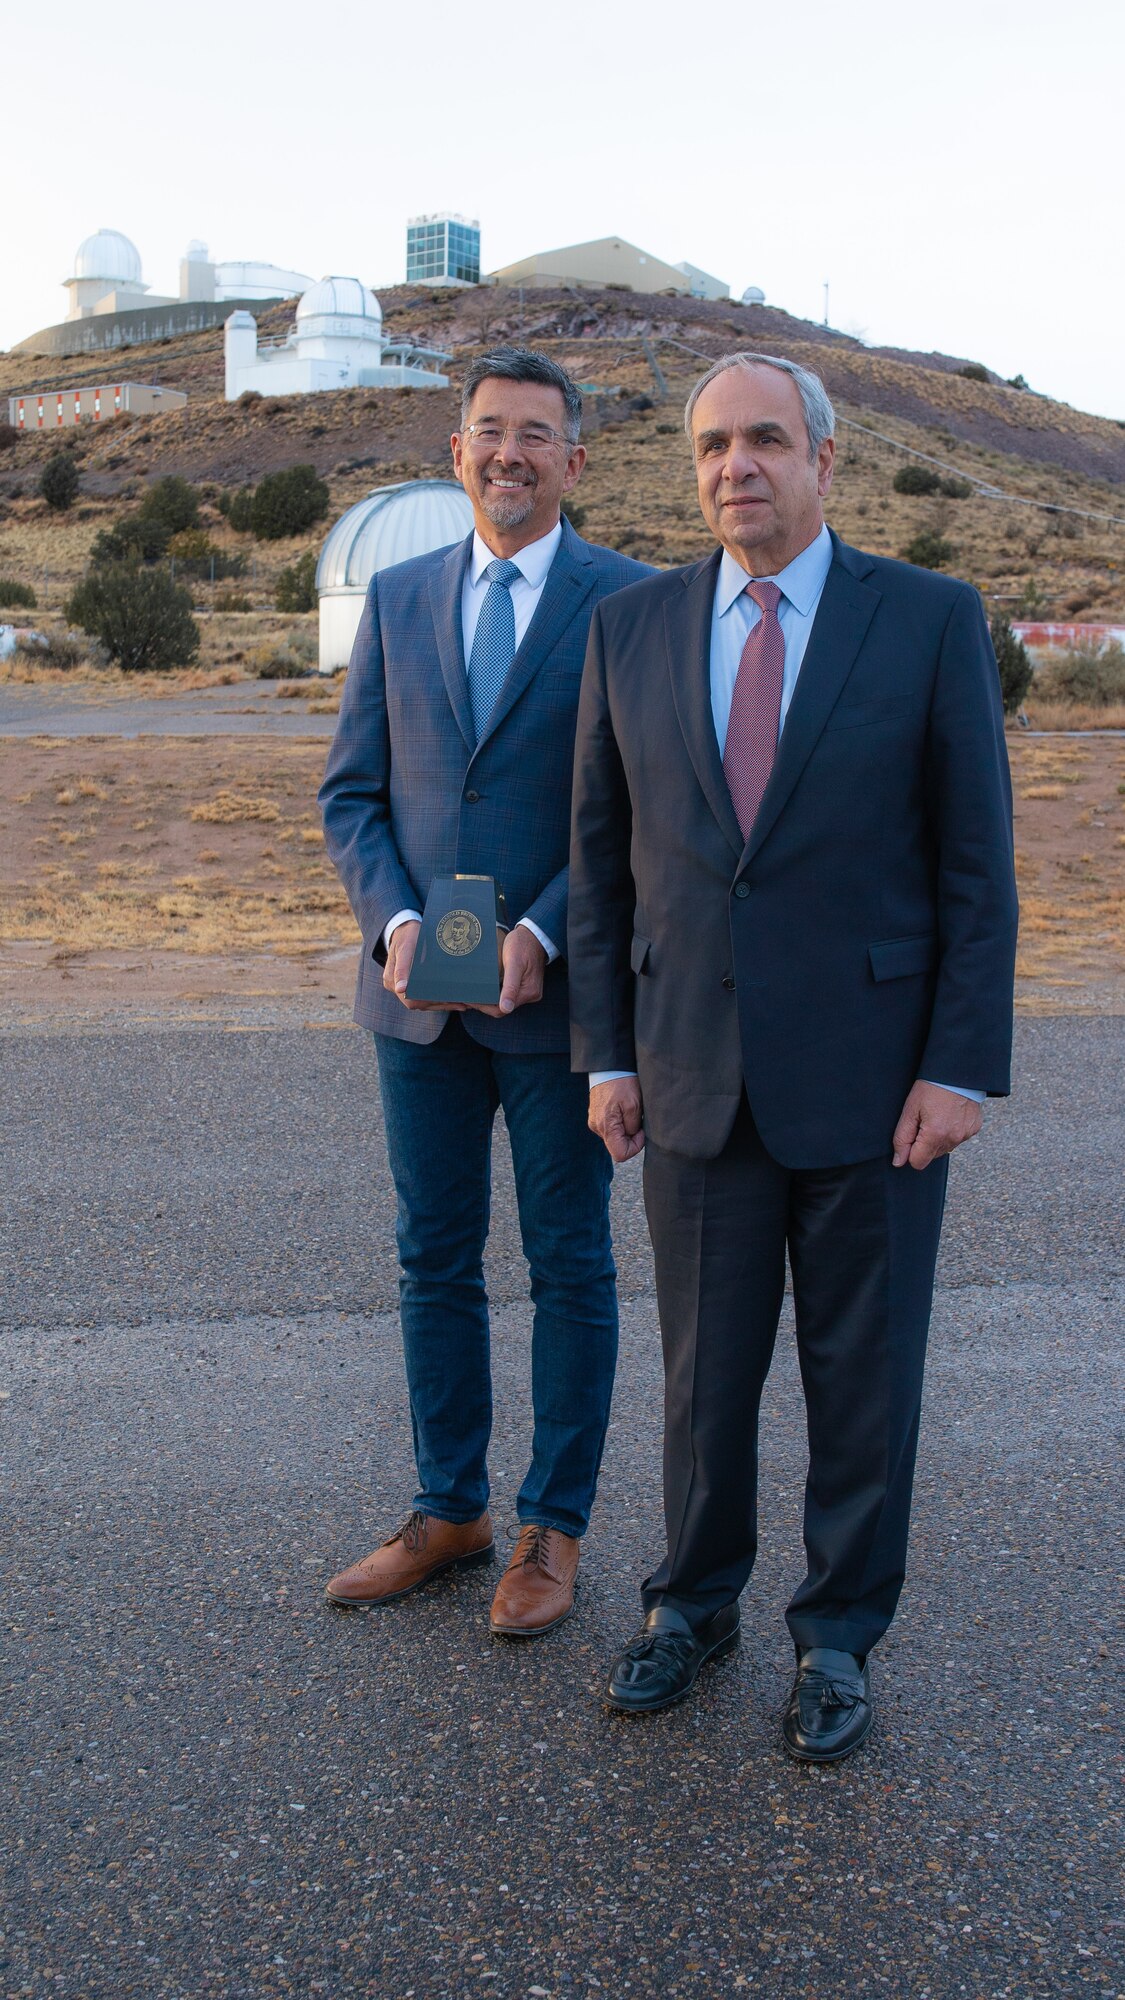 Left to Right: Air Force Research Laboratory 2018 Harold Brown Award winner Dr. Robert Johnson and Dr. Richard Joseph Chief Scientist of the Air Force stand in front of AFRL's Starfire Optical Range telescopes following the award presentation ceremony on Nov. 21, 2019. (U.S. Air Force photo/ Macee Hunt)